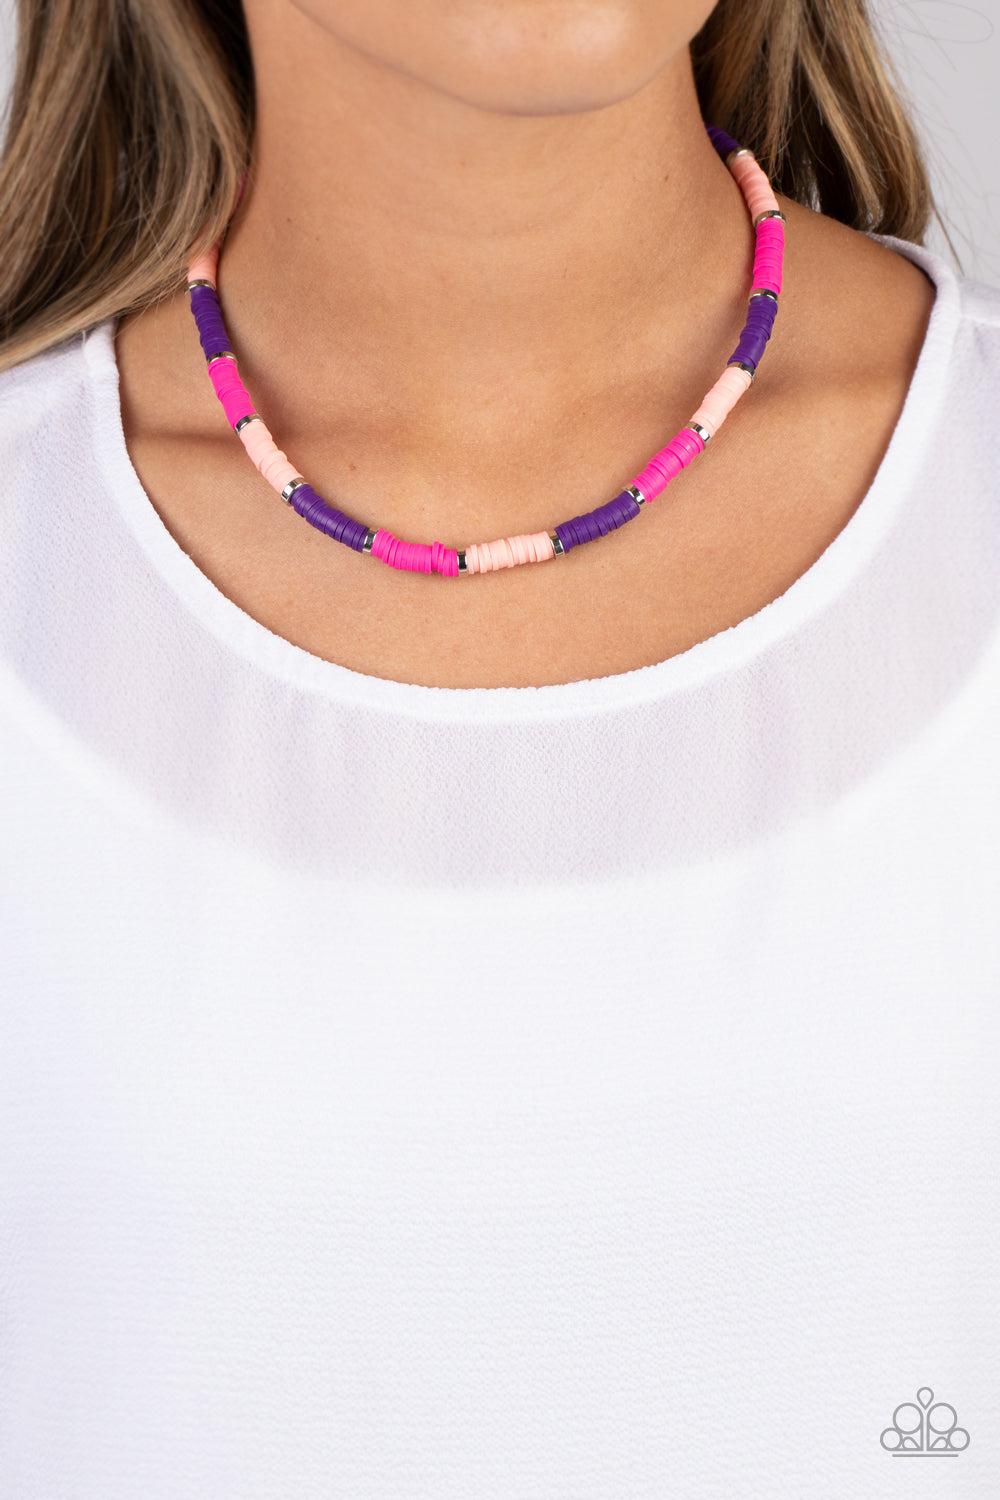 Rainbow Road Pink Necklace - Paparazzi Accessories-on model - CarasShop.com - $5 Jewelry by Cara Jewels